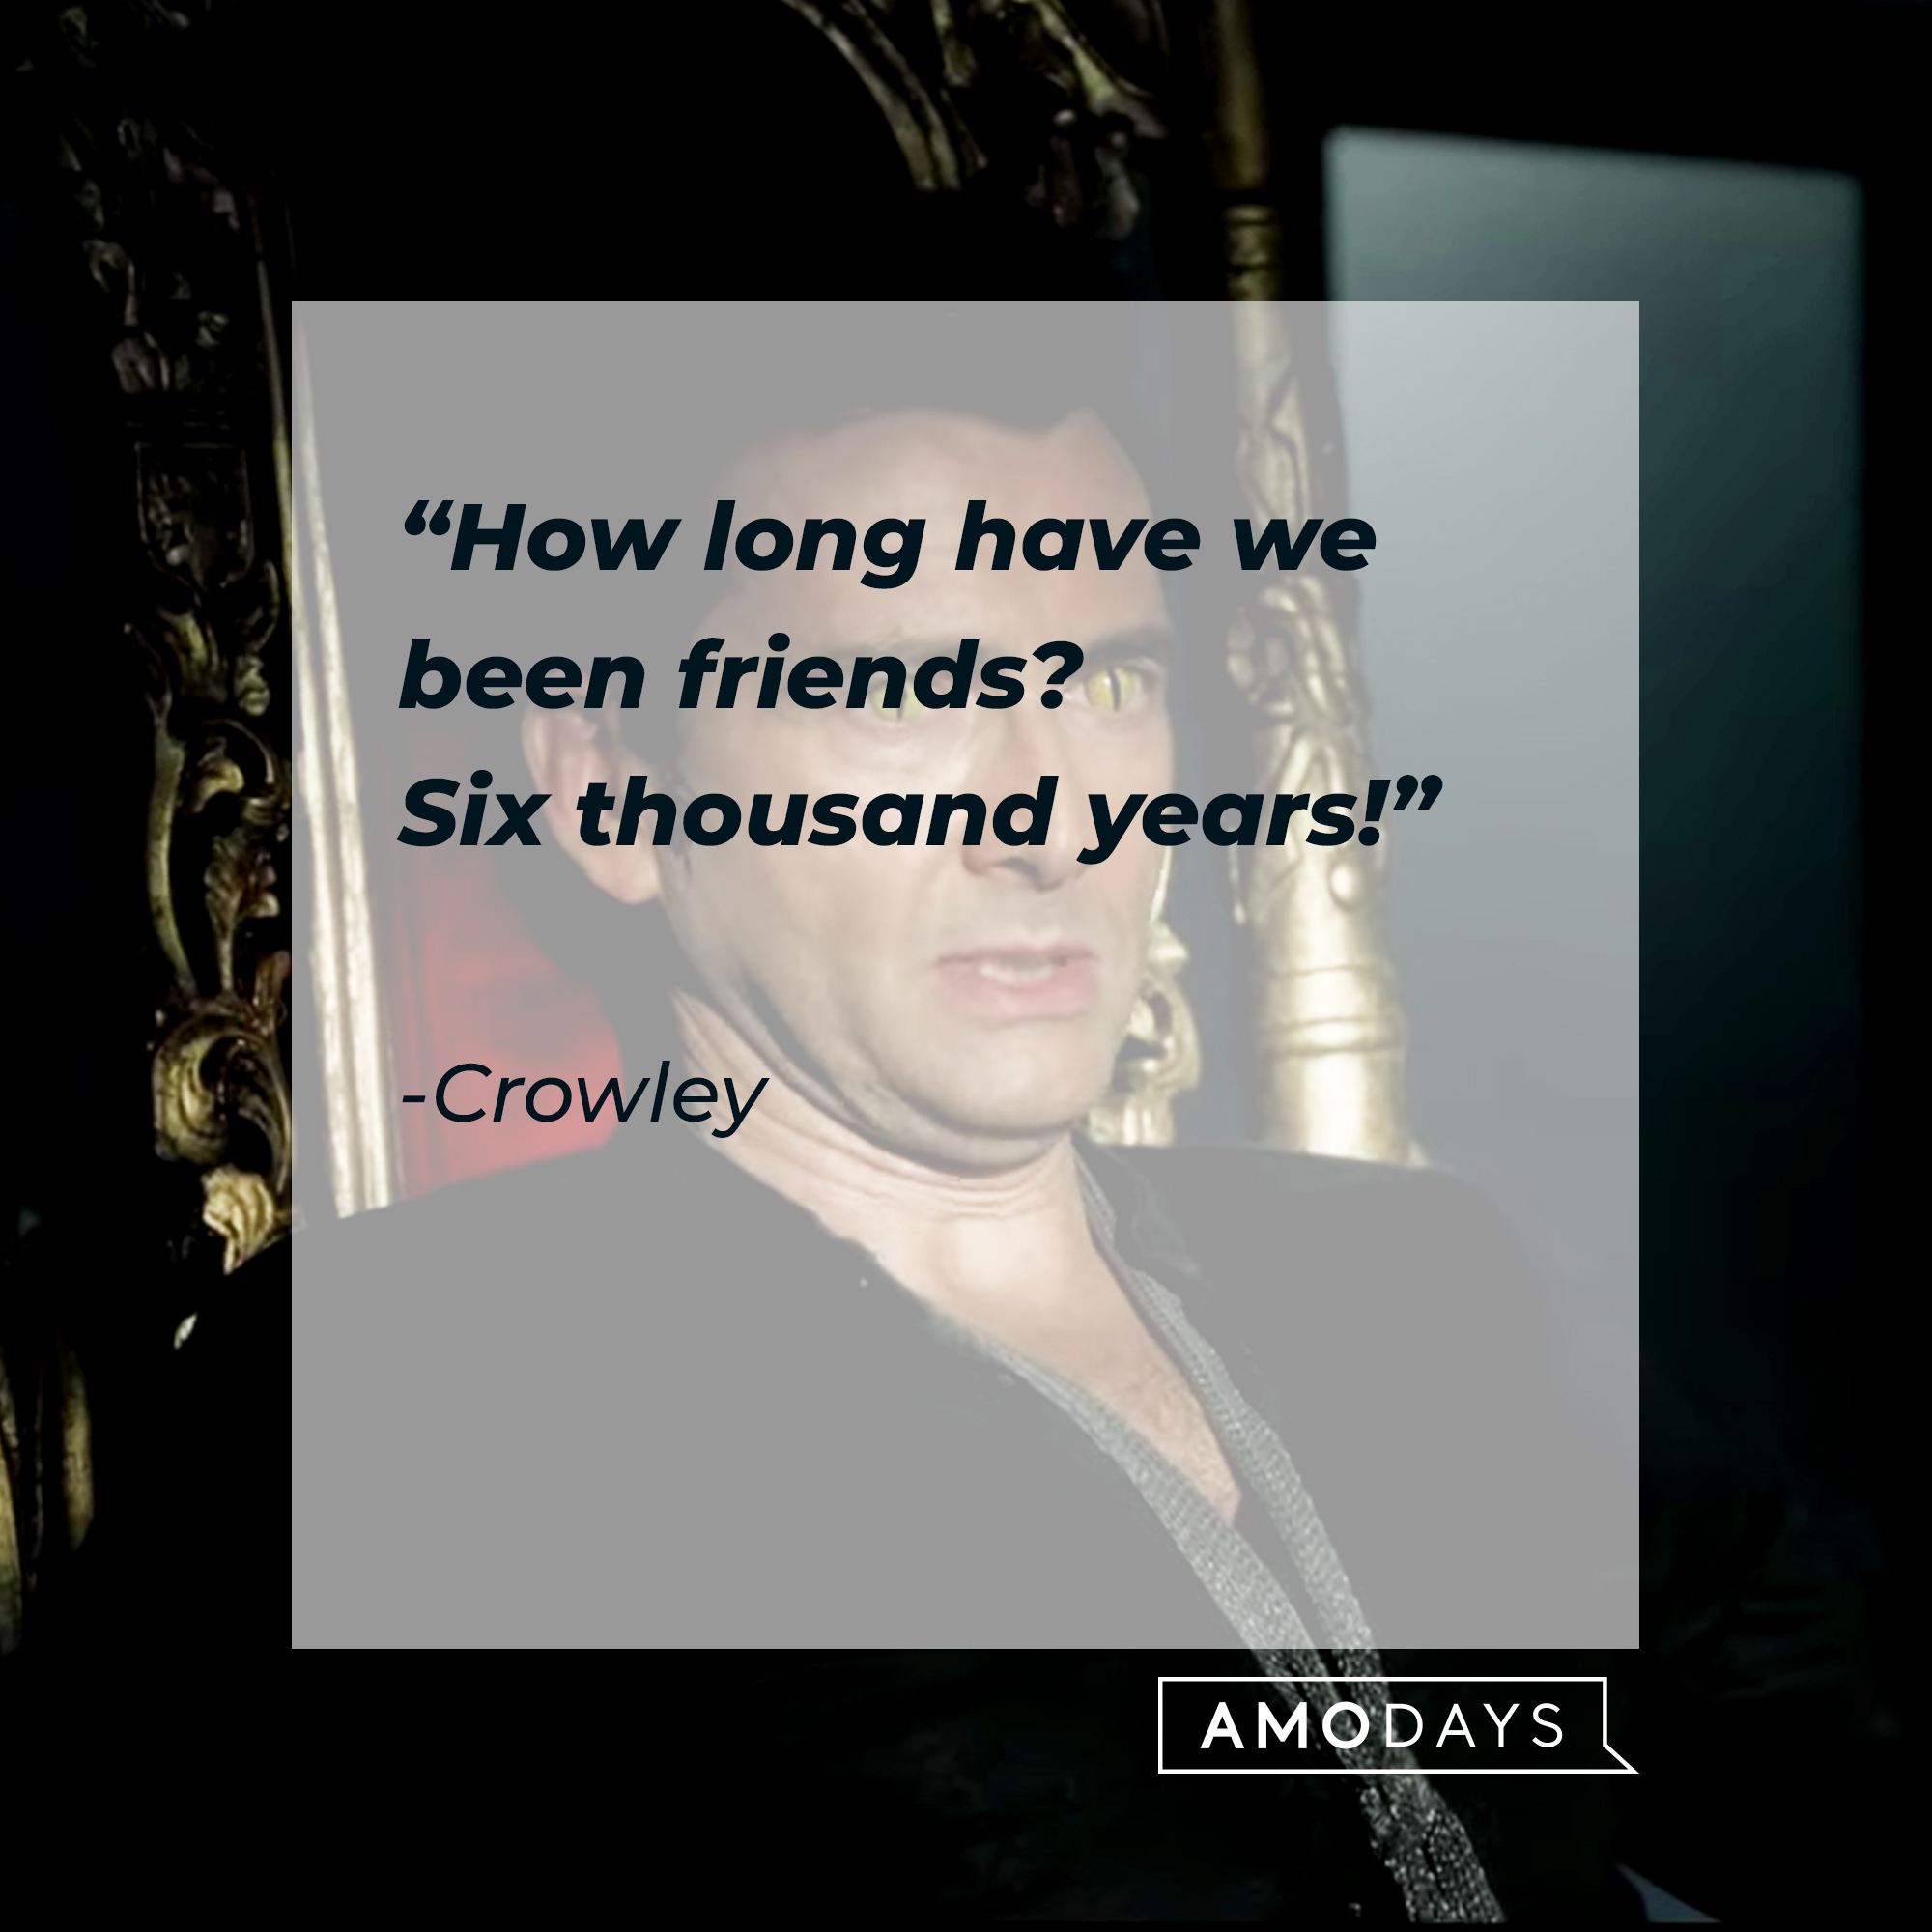 Crowley's quote: "How long have we been friends? Six thousand years!" | Source: Facebook.com/goodomensprime